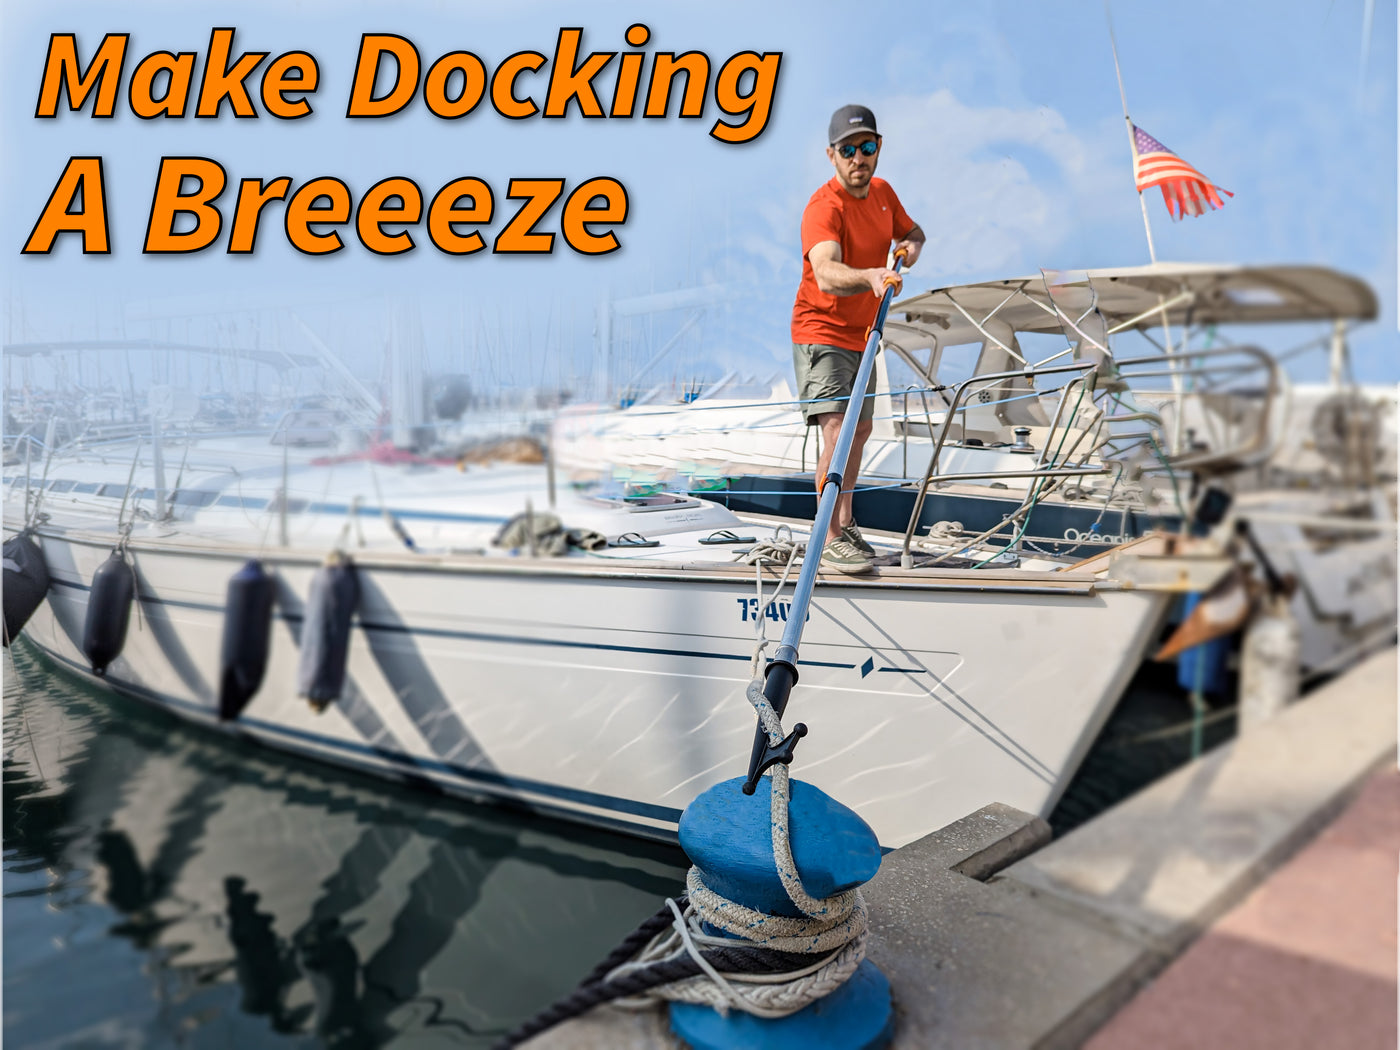 Boat Hook for Docking with Telescoping Extension Pole